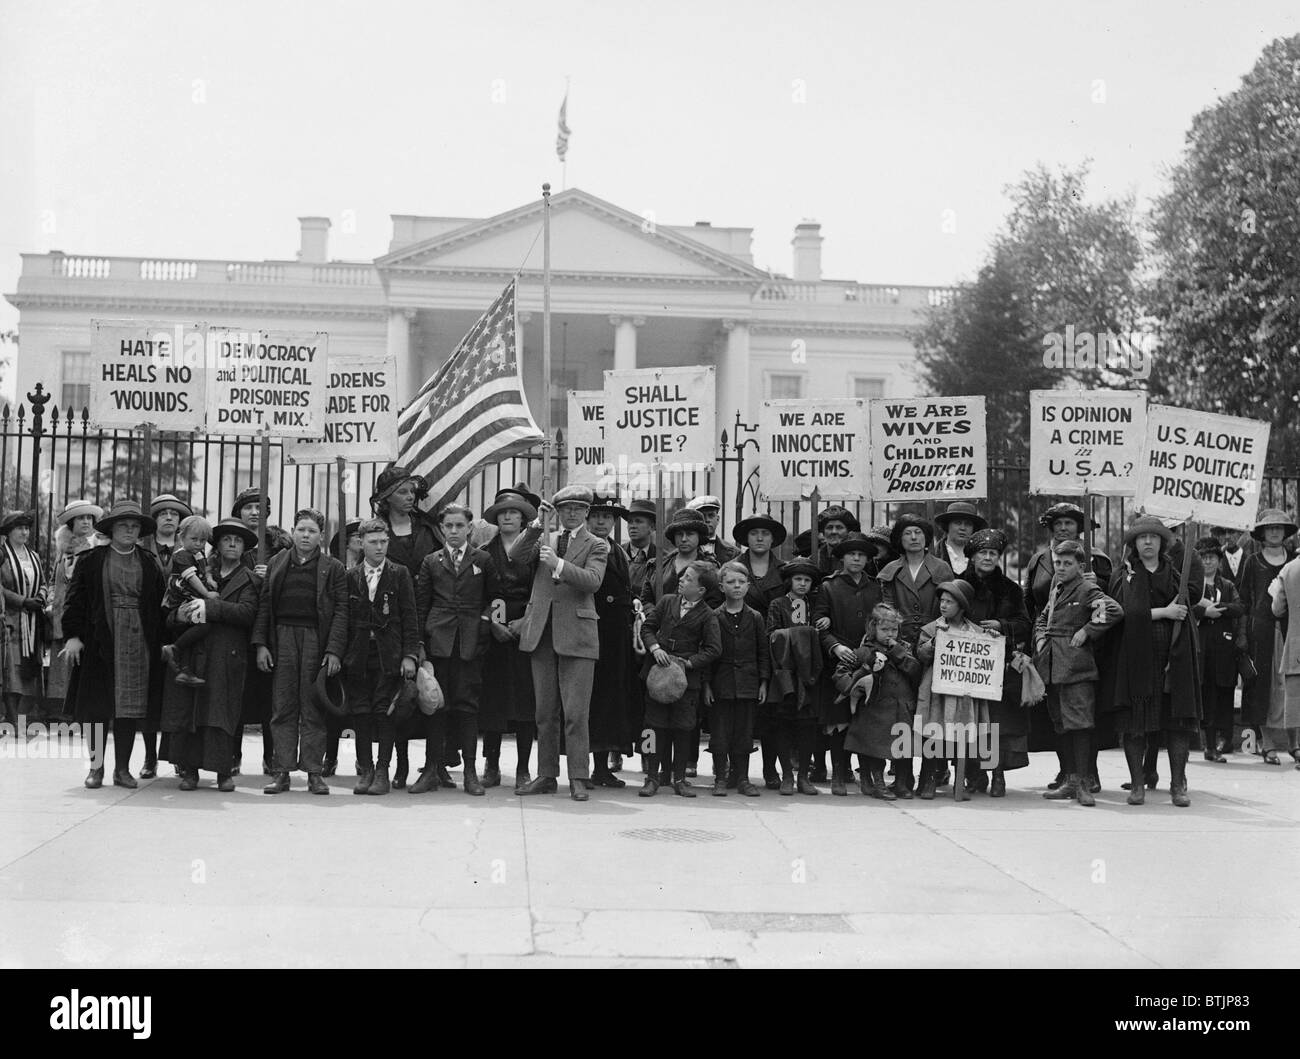 The Espionage Act of 1917 and Sedition Act of 1918 outlawed the use 'disloyal, profane, scurrilous, or abusive language' about the United States government, flag, or armed forces during World War 1. In 1922 the children of imprisoned dissidents protested for their release. Stock Photo